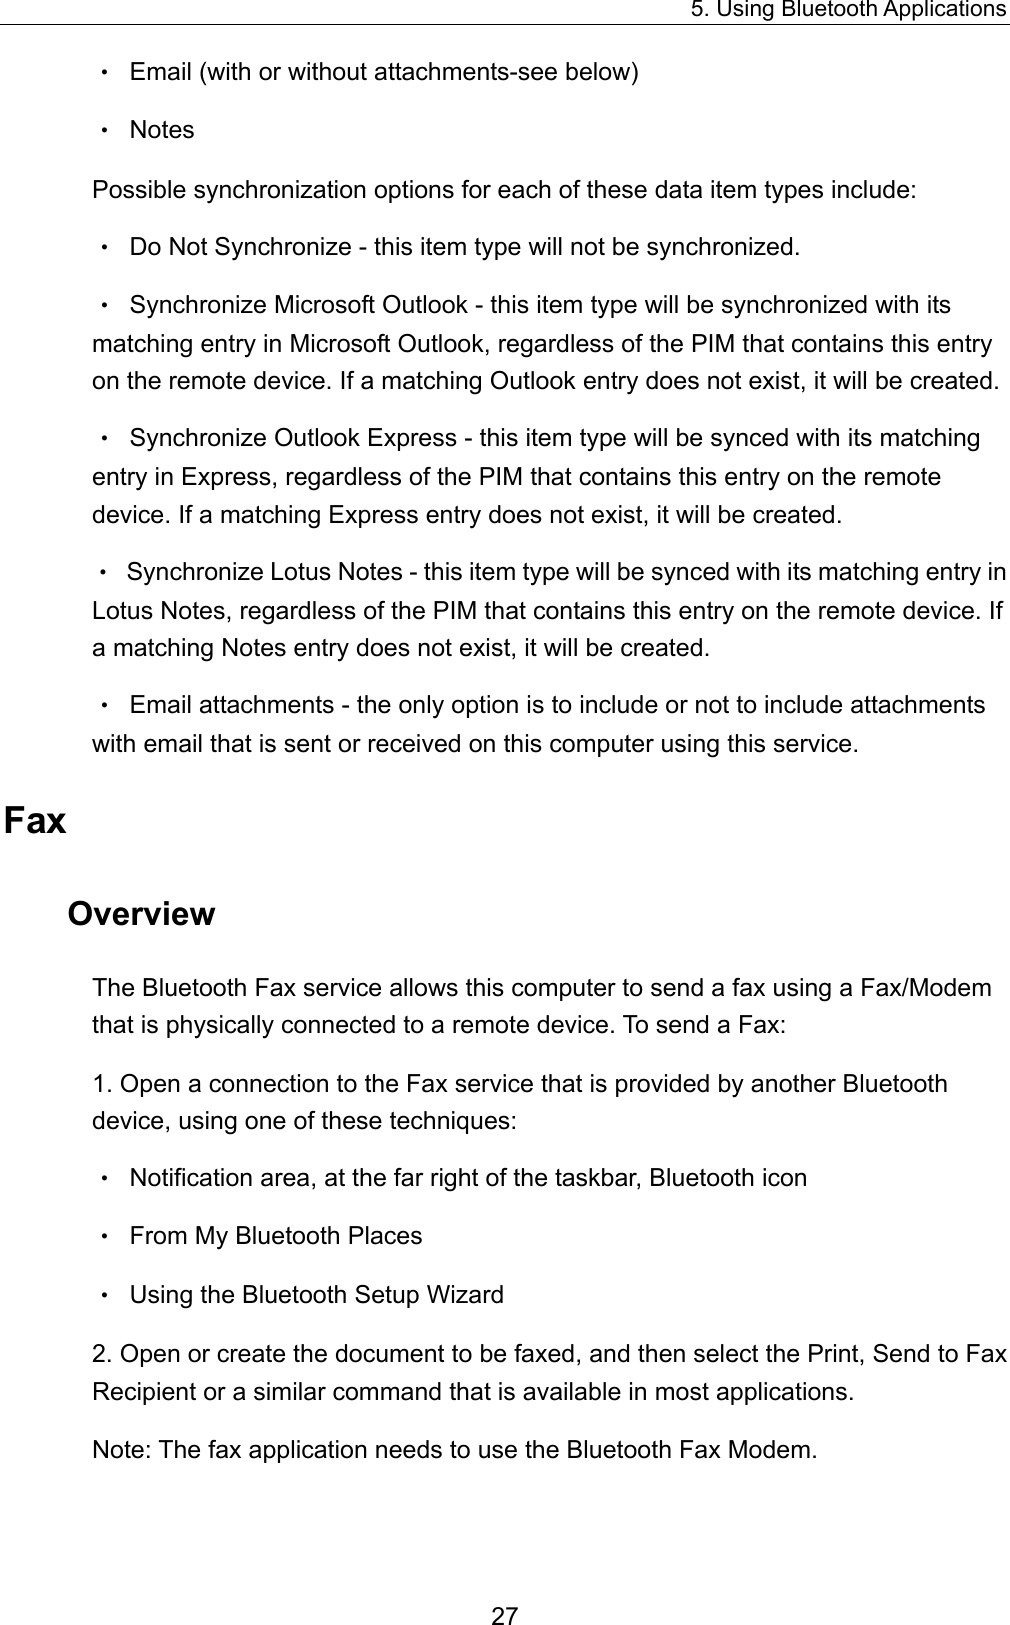 5. Using Bluetooth Applications 27 •  Email (with or without attachments-see below) • Notes Possible synchronization options for each of these data item types include: •  Do Not Synchronize - this item type will not be synchronized. •  Synchronize Microsoft Outlook - this item type will be synchronized with its matching entry in Microsoft Outlook, regardless of the PIM that contains this entry on the remote device. If a matching Outlook entry does not exist, it will be created. •  Synchronize Outlook Express - this item type will be synced with its matching entry in Express, regardless of the PIM that contains this entry on the remote device. If a matching Express entry does not exist, it will be created. •  Synchronize Lotus Notes - this item type will be synced with its matching entry in Lotus Notes, regardless of the PIM that contains this entry on the remote device. If a matching Notes entry does not exist, it will be created. •  Email attachments - the only option is to include or not to include attachments with email that is sent or received on this computer using this service. Fax Overview The Bluetooth Fax service allows this computer to send a fax using a Fax/Modem that is physically connected to a remote device. To send a Fax: 1. Open a connection to the Fax service that is provided by another Bluetooth device, using one of these techniques: •  Notification area, at the far right of the taskbar, Bluetooth icon •  From My Bluetooth Places •  Using the Bluetooth Setup Wizard 2. Open or create the document to be faxed, and then select the Print, Send to Fax Recipient or a similar command that is available in most applications. Note: The fax application needs to use the Bluetooth Fax Modem. 